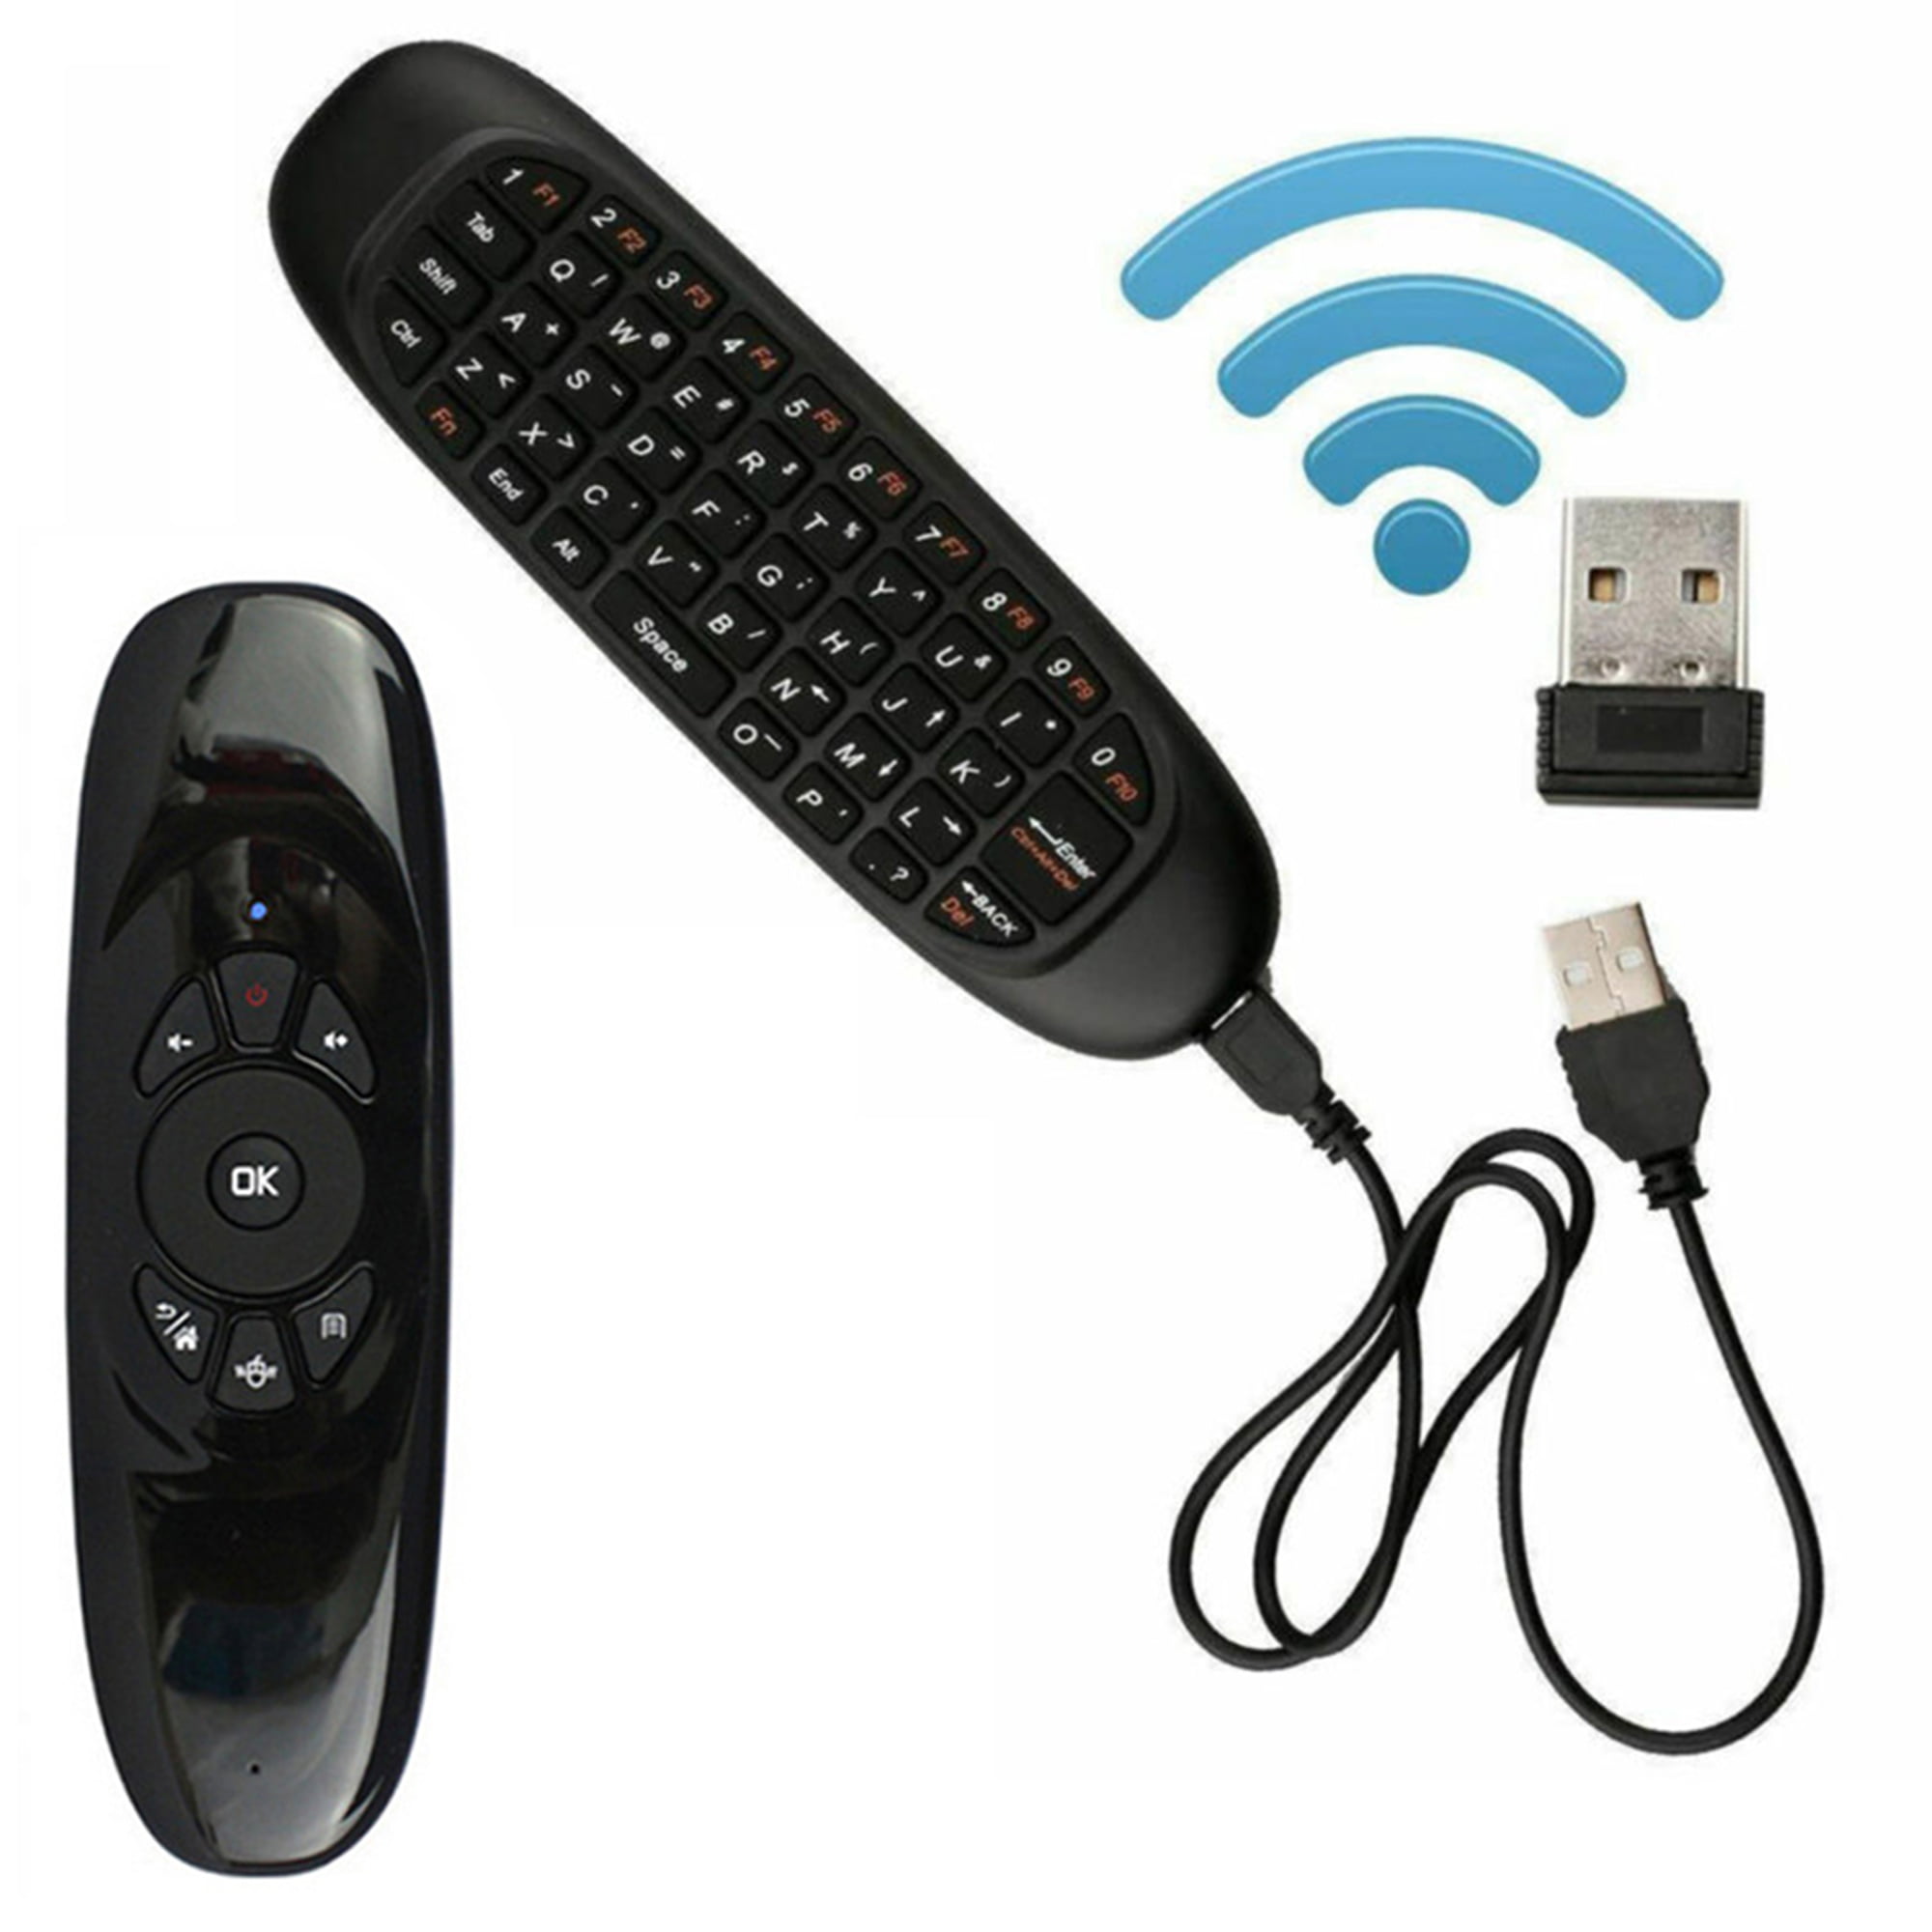 Calvas 2.4 GHz 77 Keys Mini Wireless Keyboard Air Remote Mouse Control Touchp With 3-Color LED Backlight And Receiver/USB Cable 